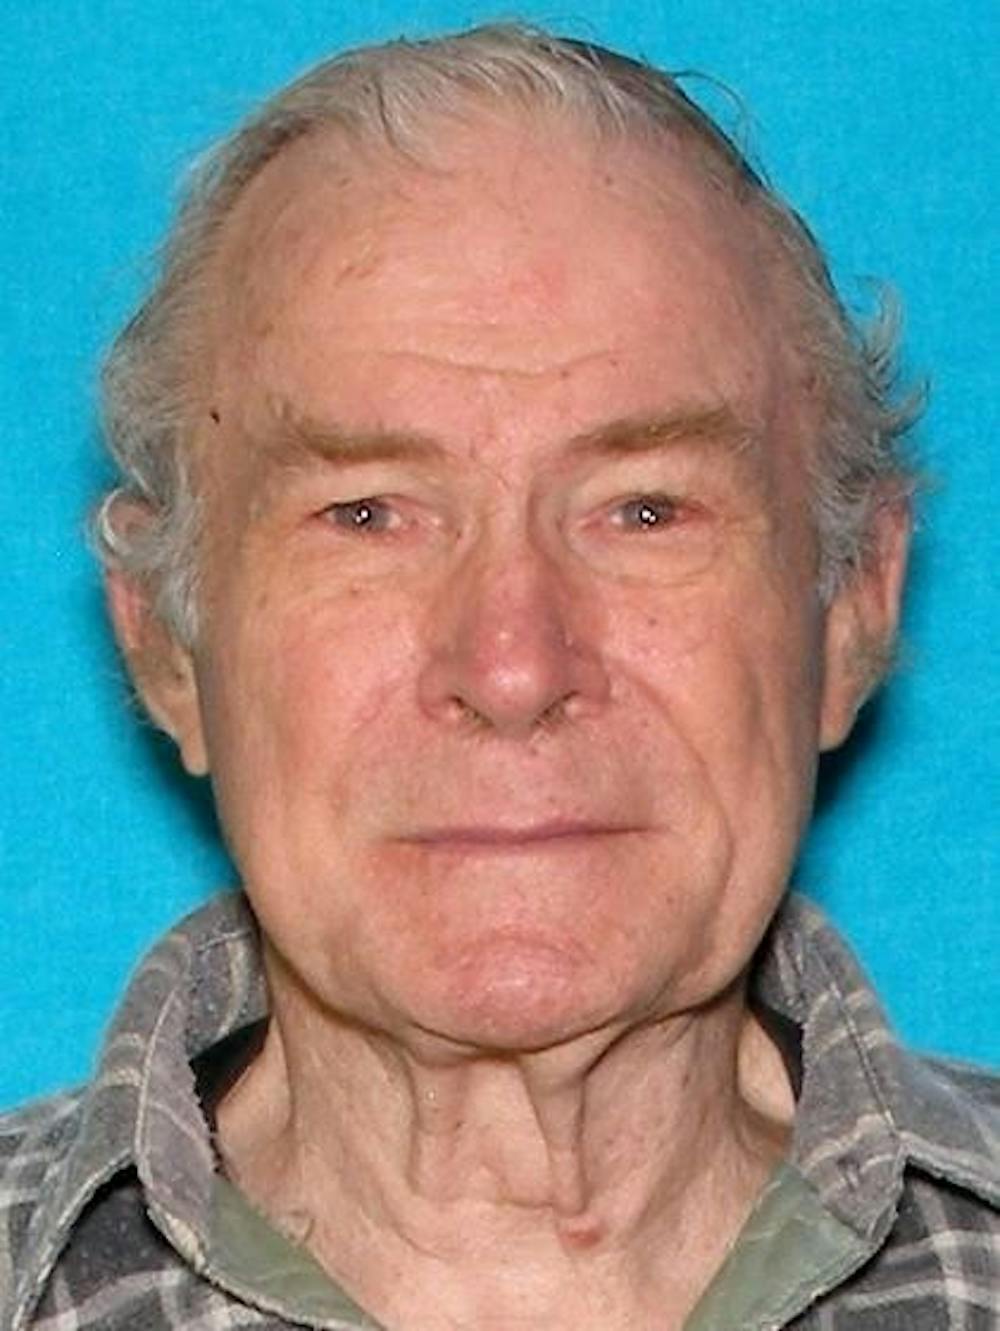 Robert L. Thompson, an 81-year-old man from Pendleton, Indiana, is missing along with a maroon Buick LeSabre. The Indiana State Police issued a statewide silver alert at about midnight Friday.&nbsp;